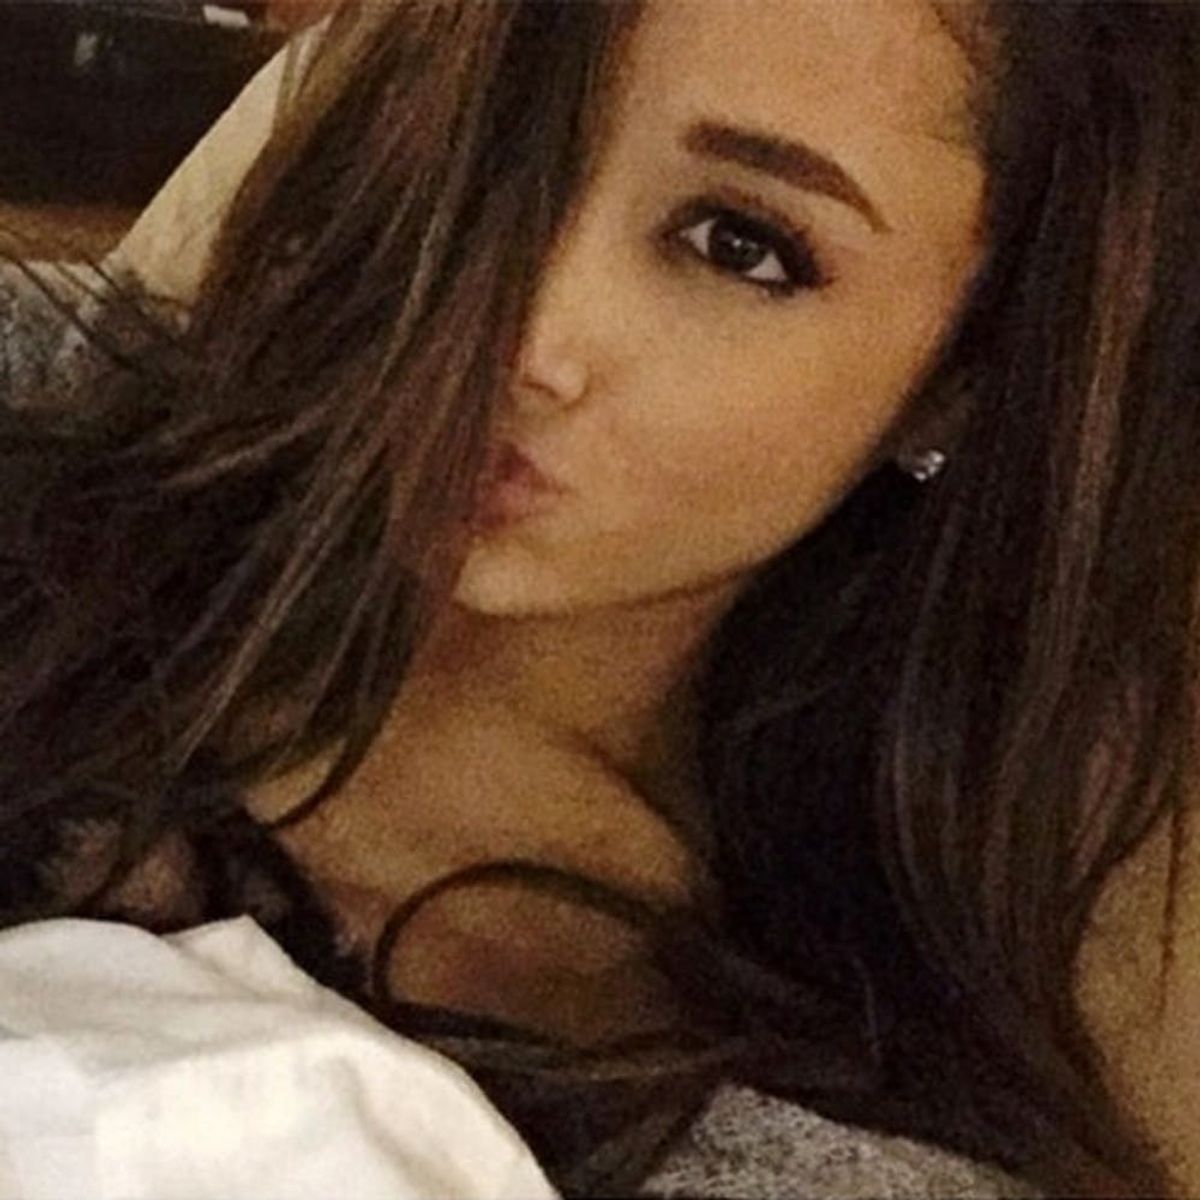 What Do You Think of Ariana Grande’s Brand New ‘Do?